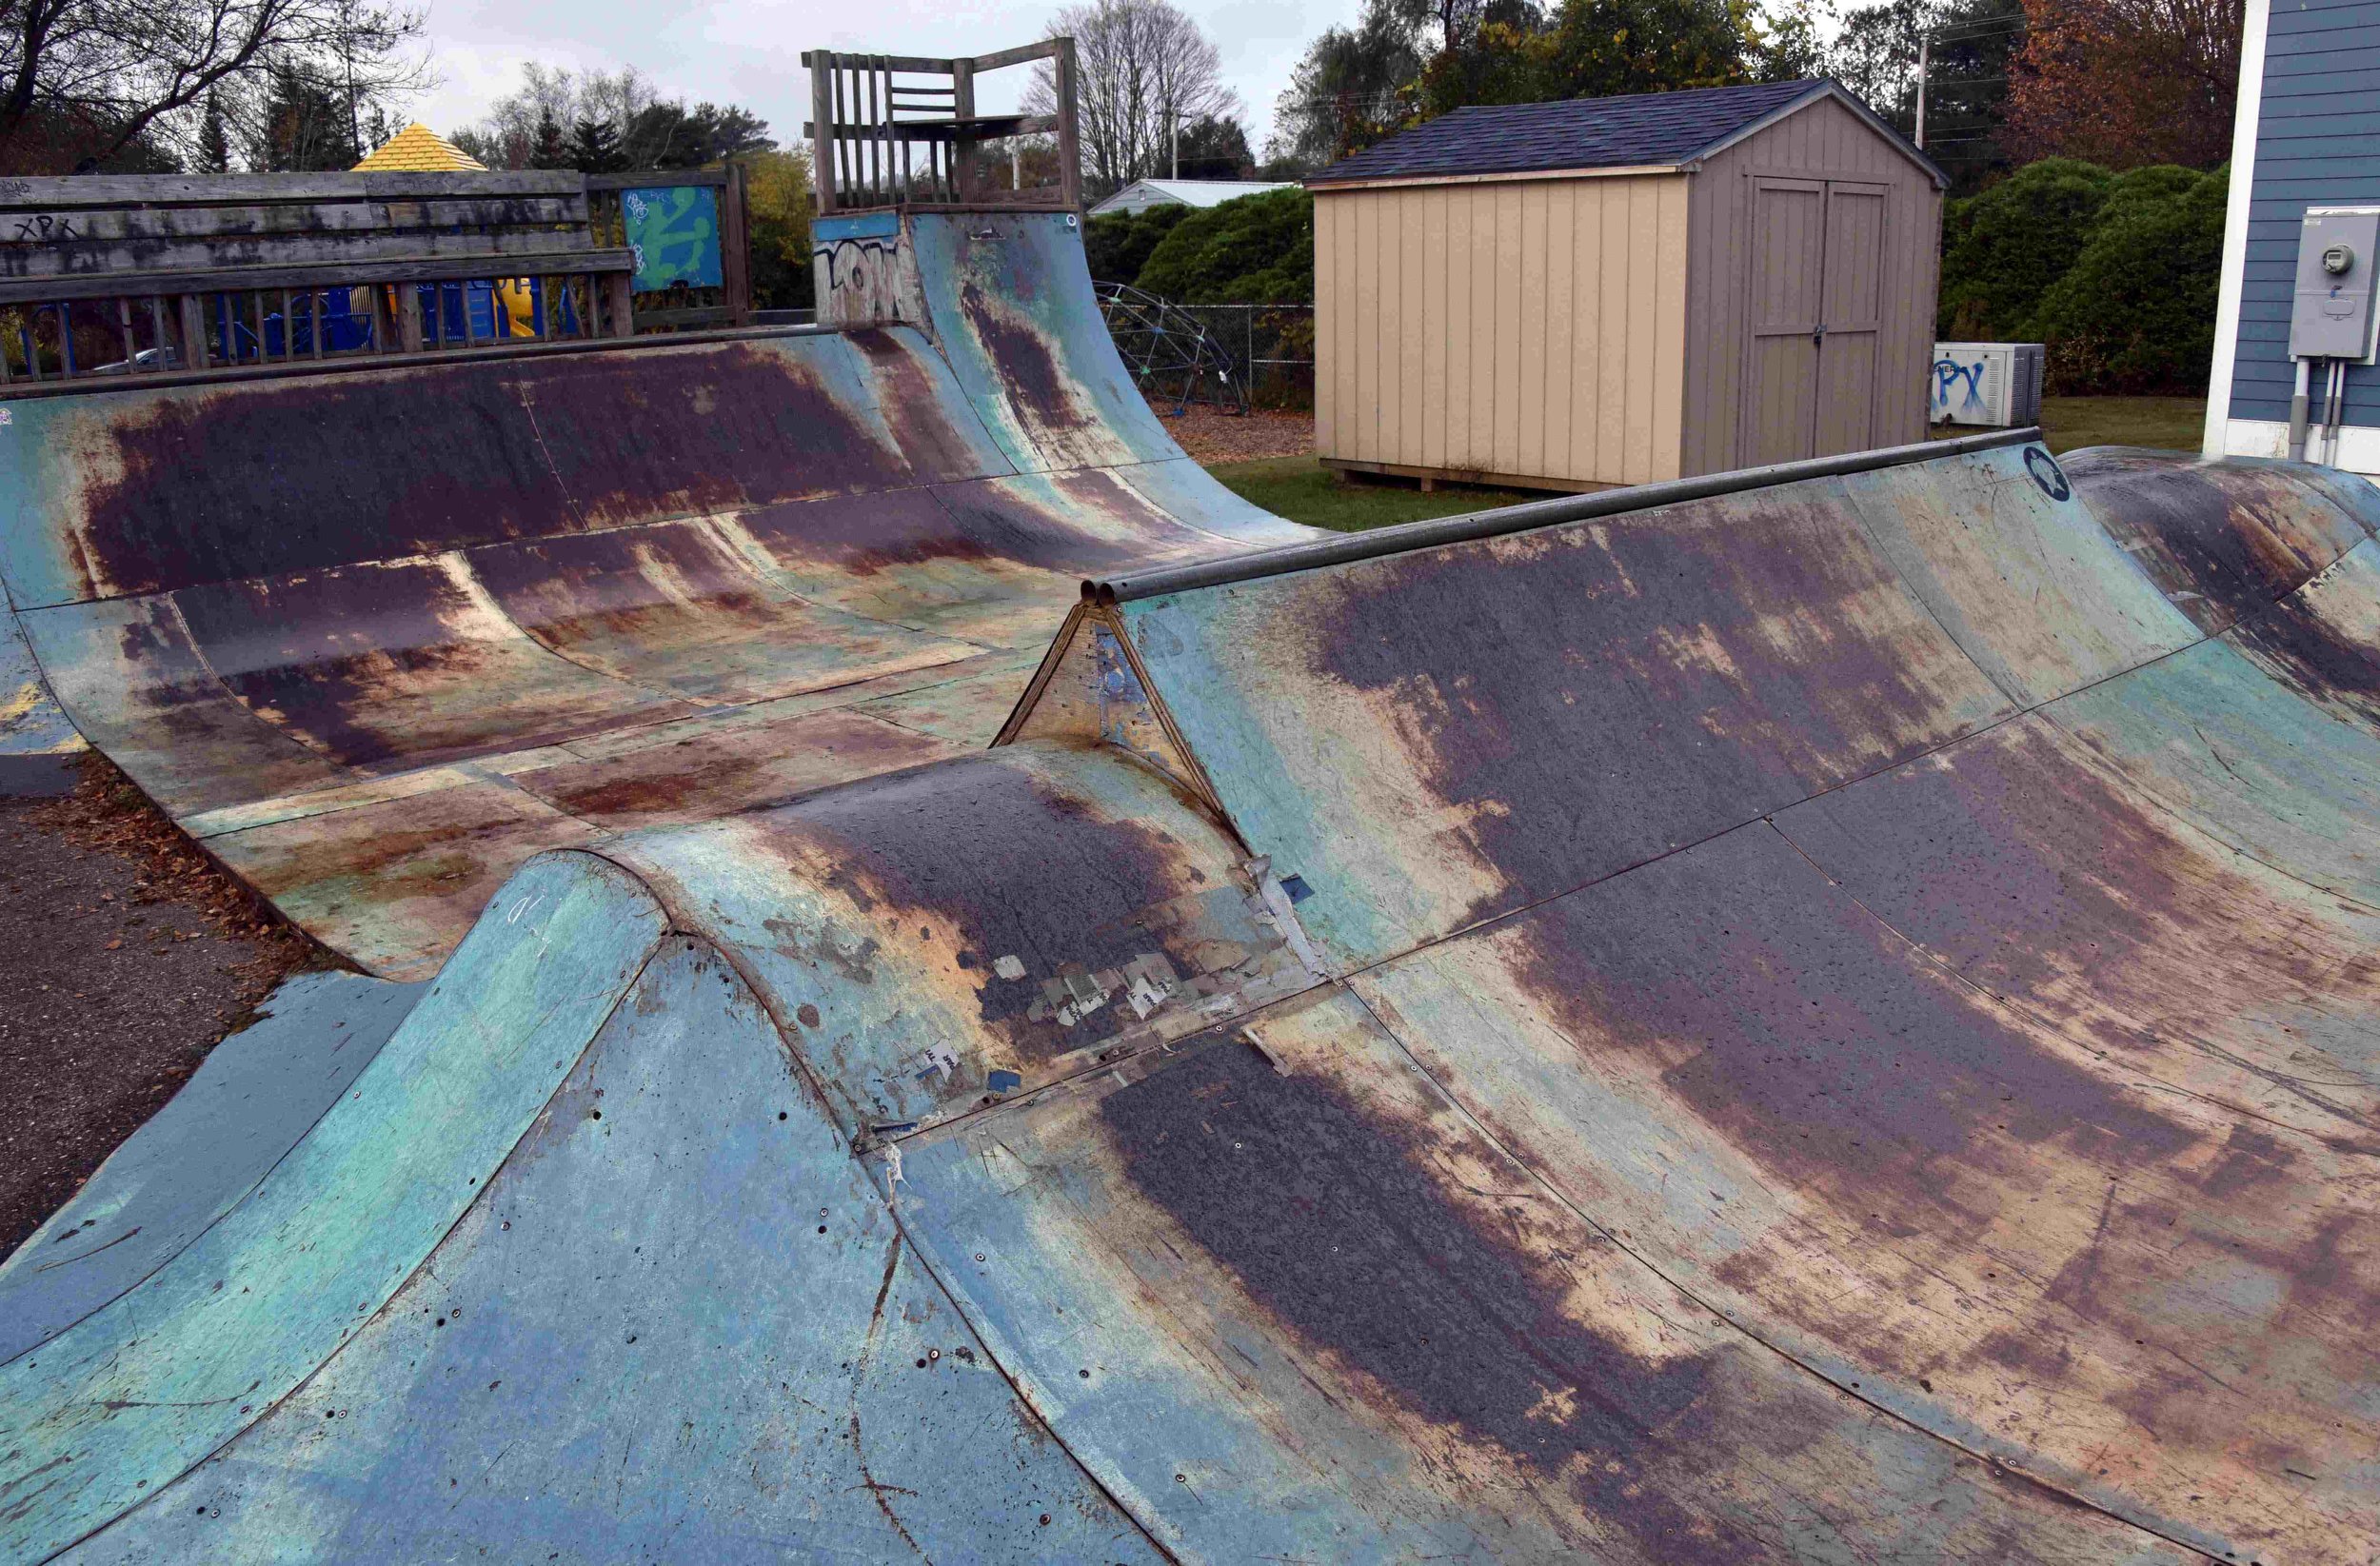  The original skatepark had reached the end of its expected lifespan. Photo by Gordon Miller 